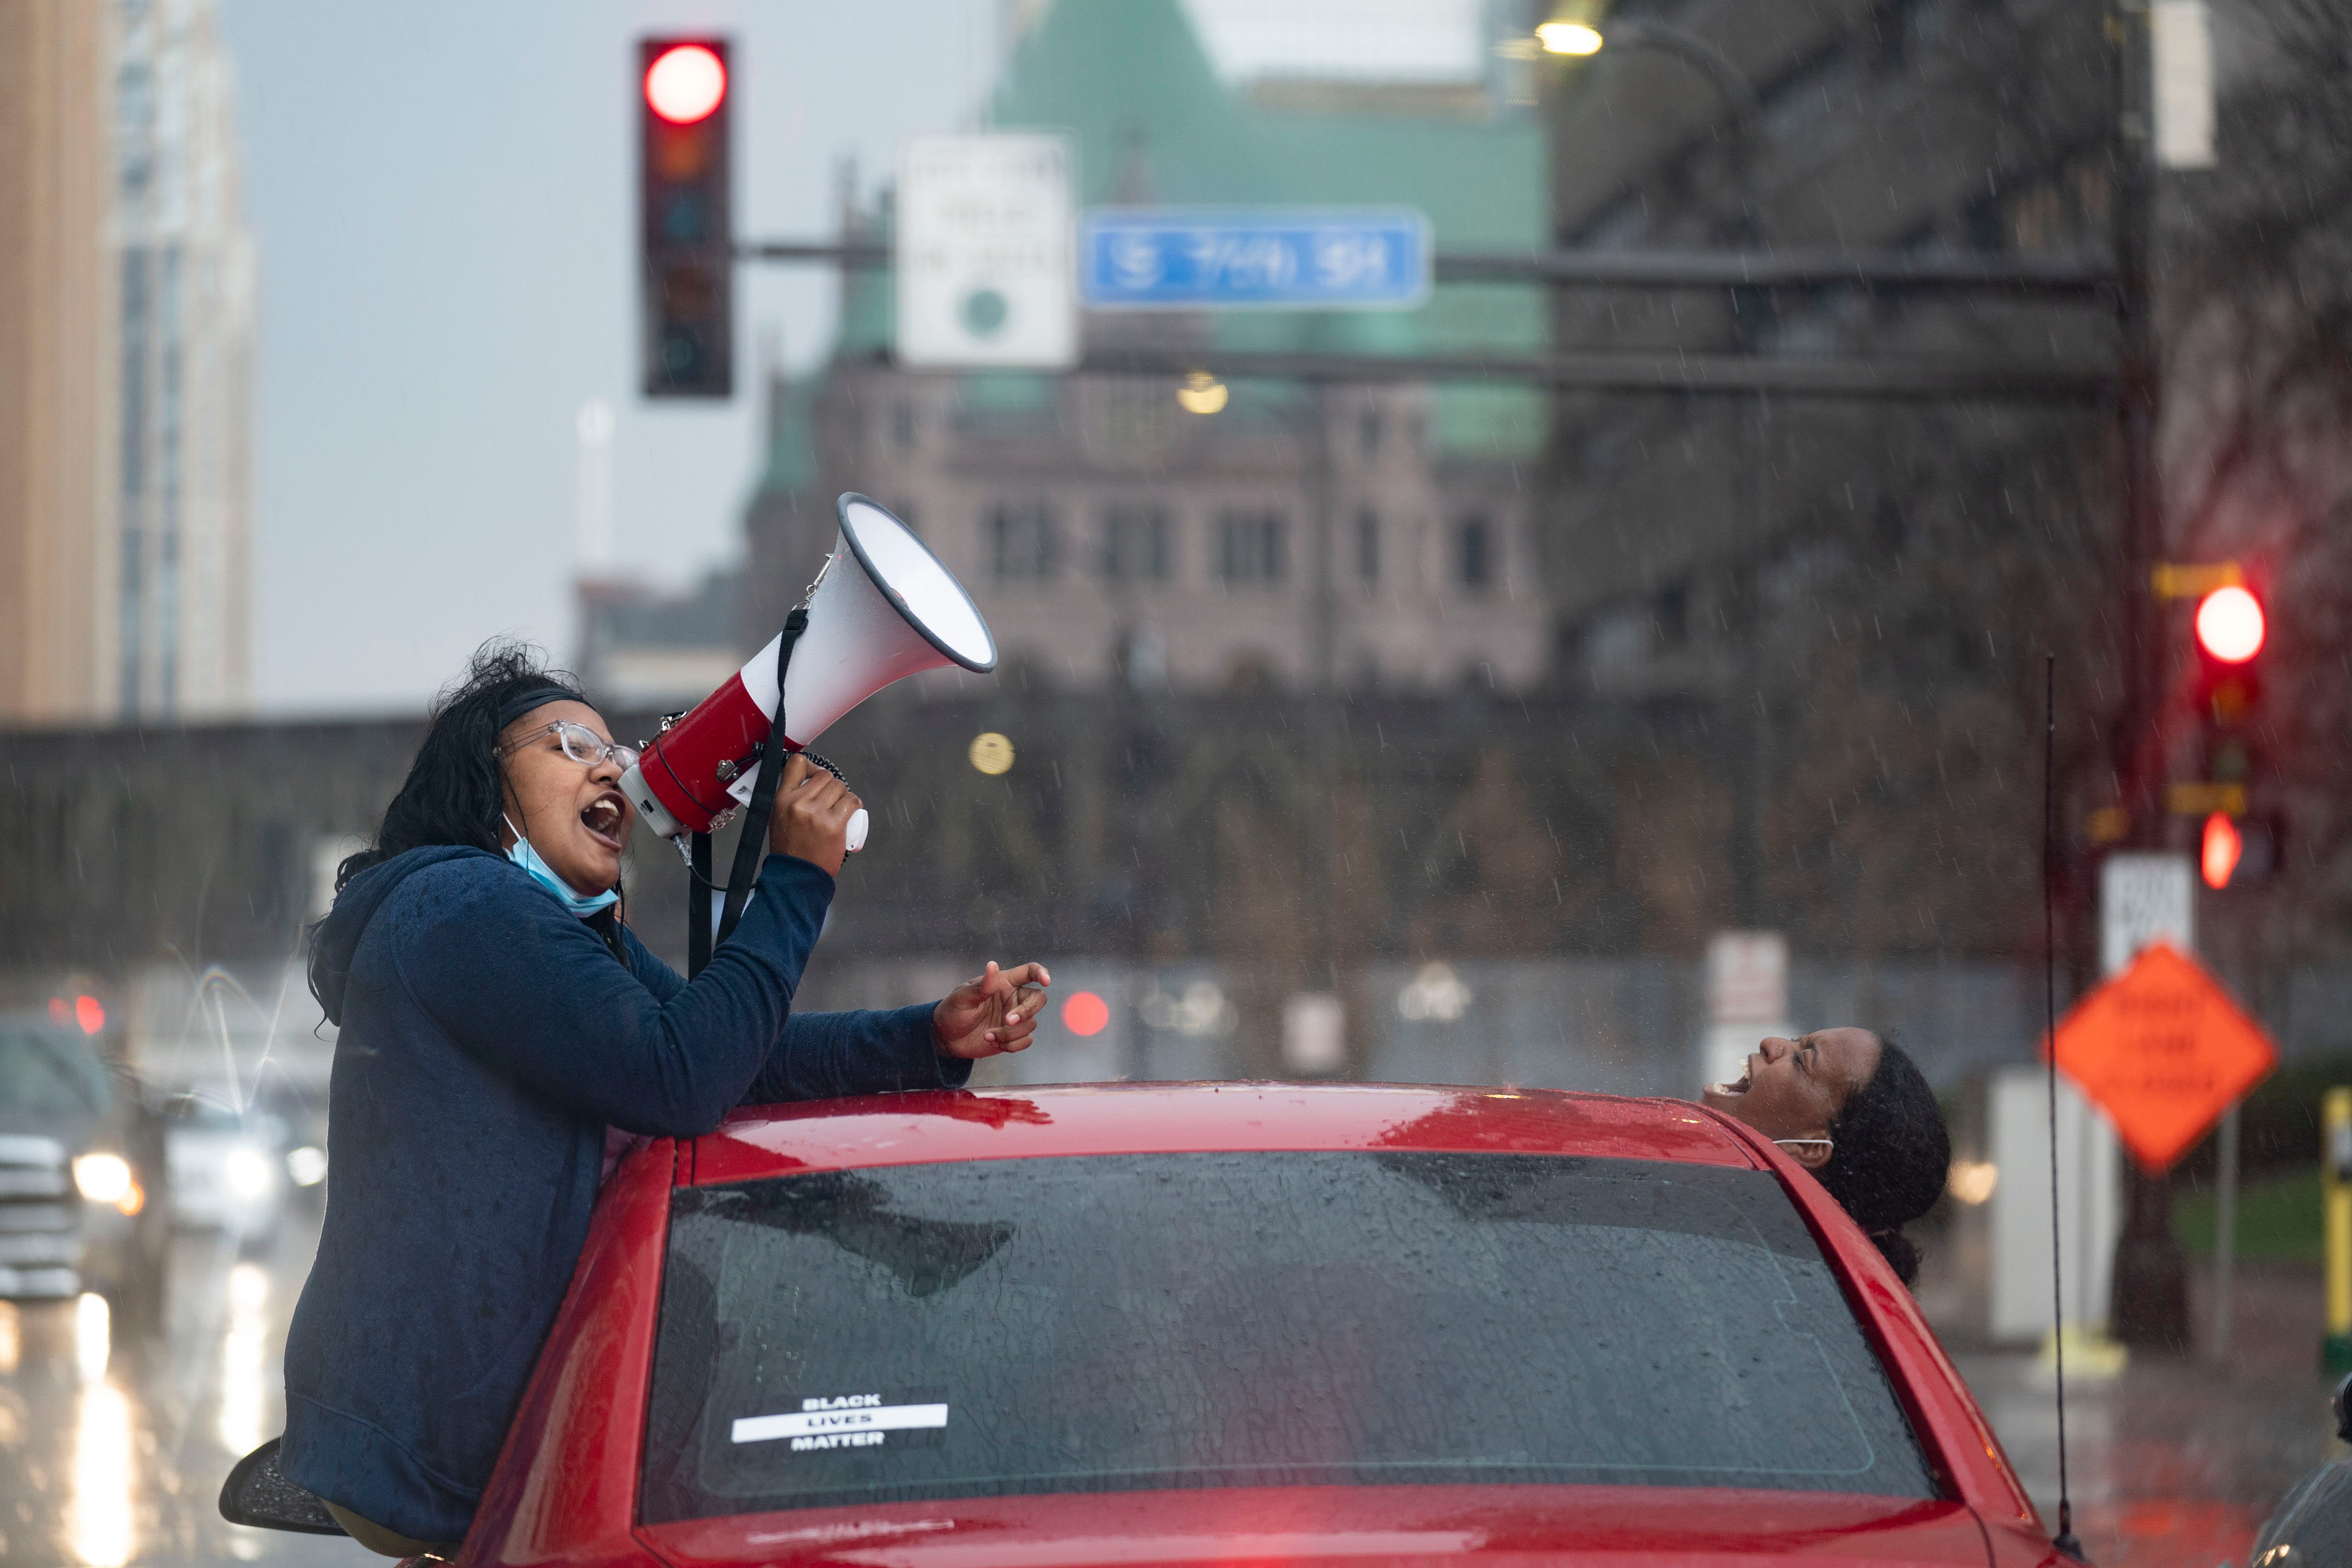 The “End Violence Against Women” car protest, organized by members of Visual Black Justice, was one of many protests in Minneapolis during the trial of Derek Chauvin. This car protest wove through neighborhoods, ending at the Hennepin County Government Center, where the trial was held.